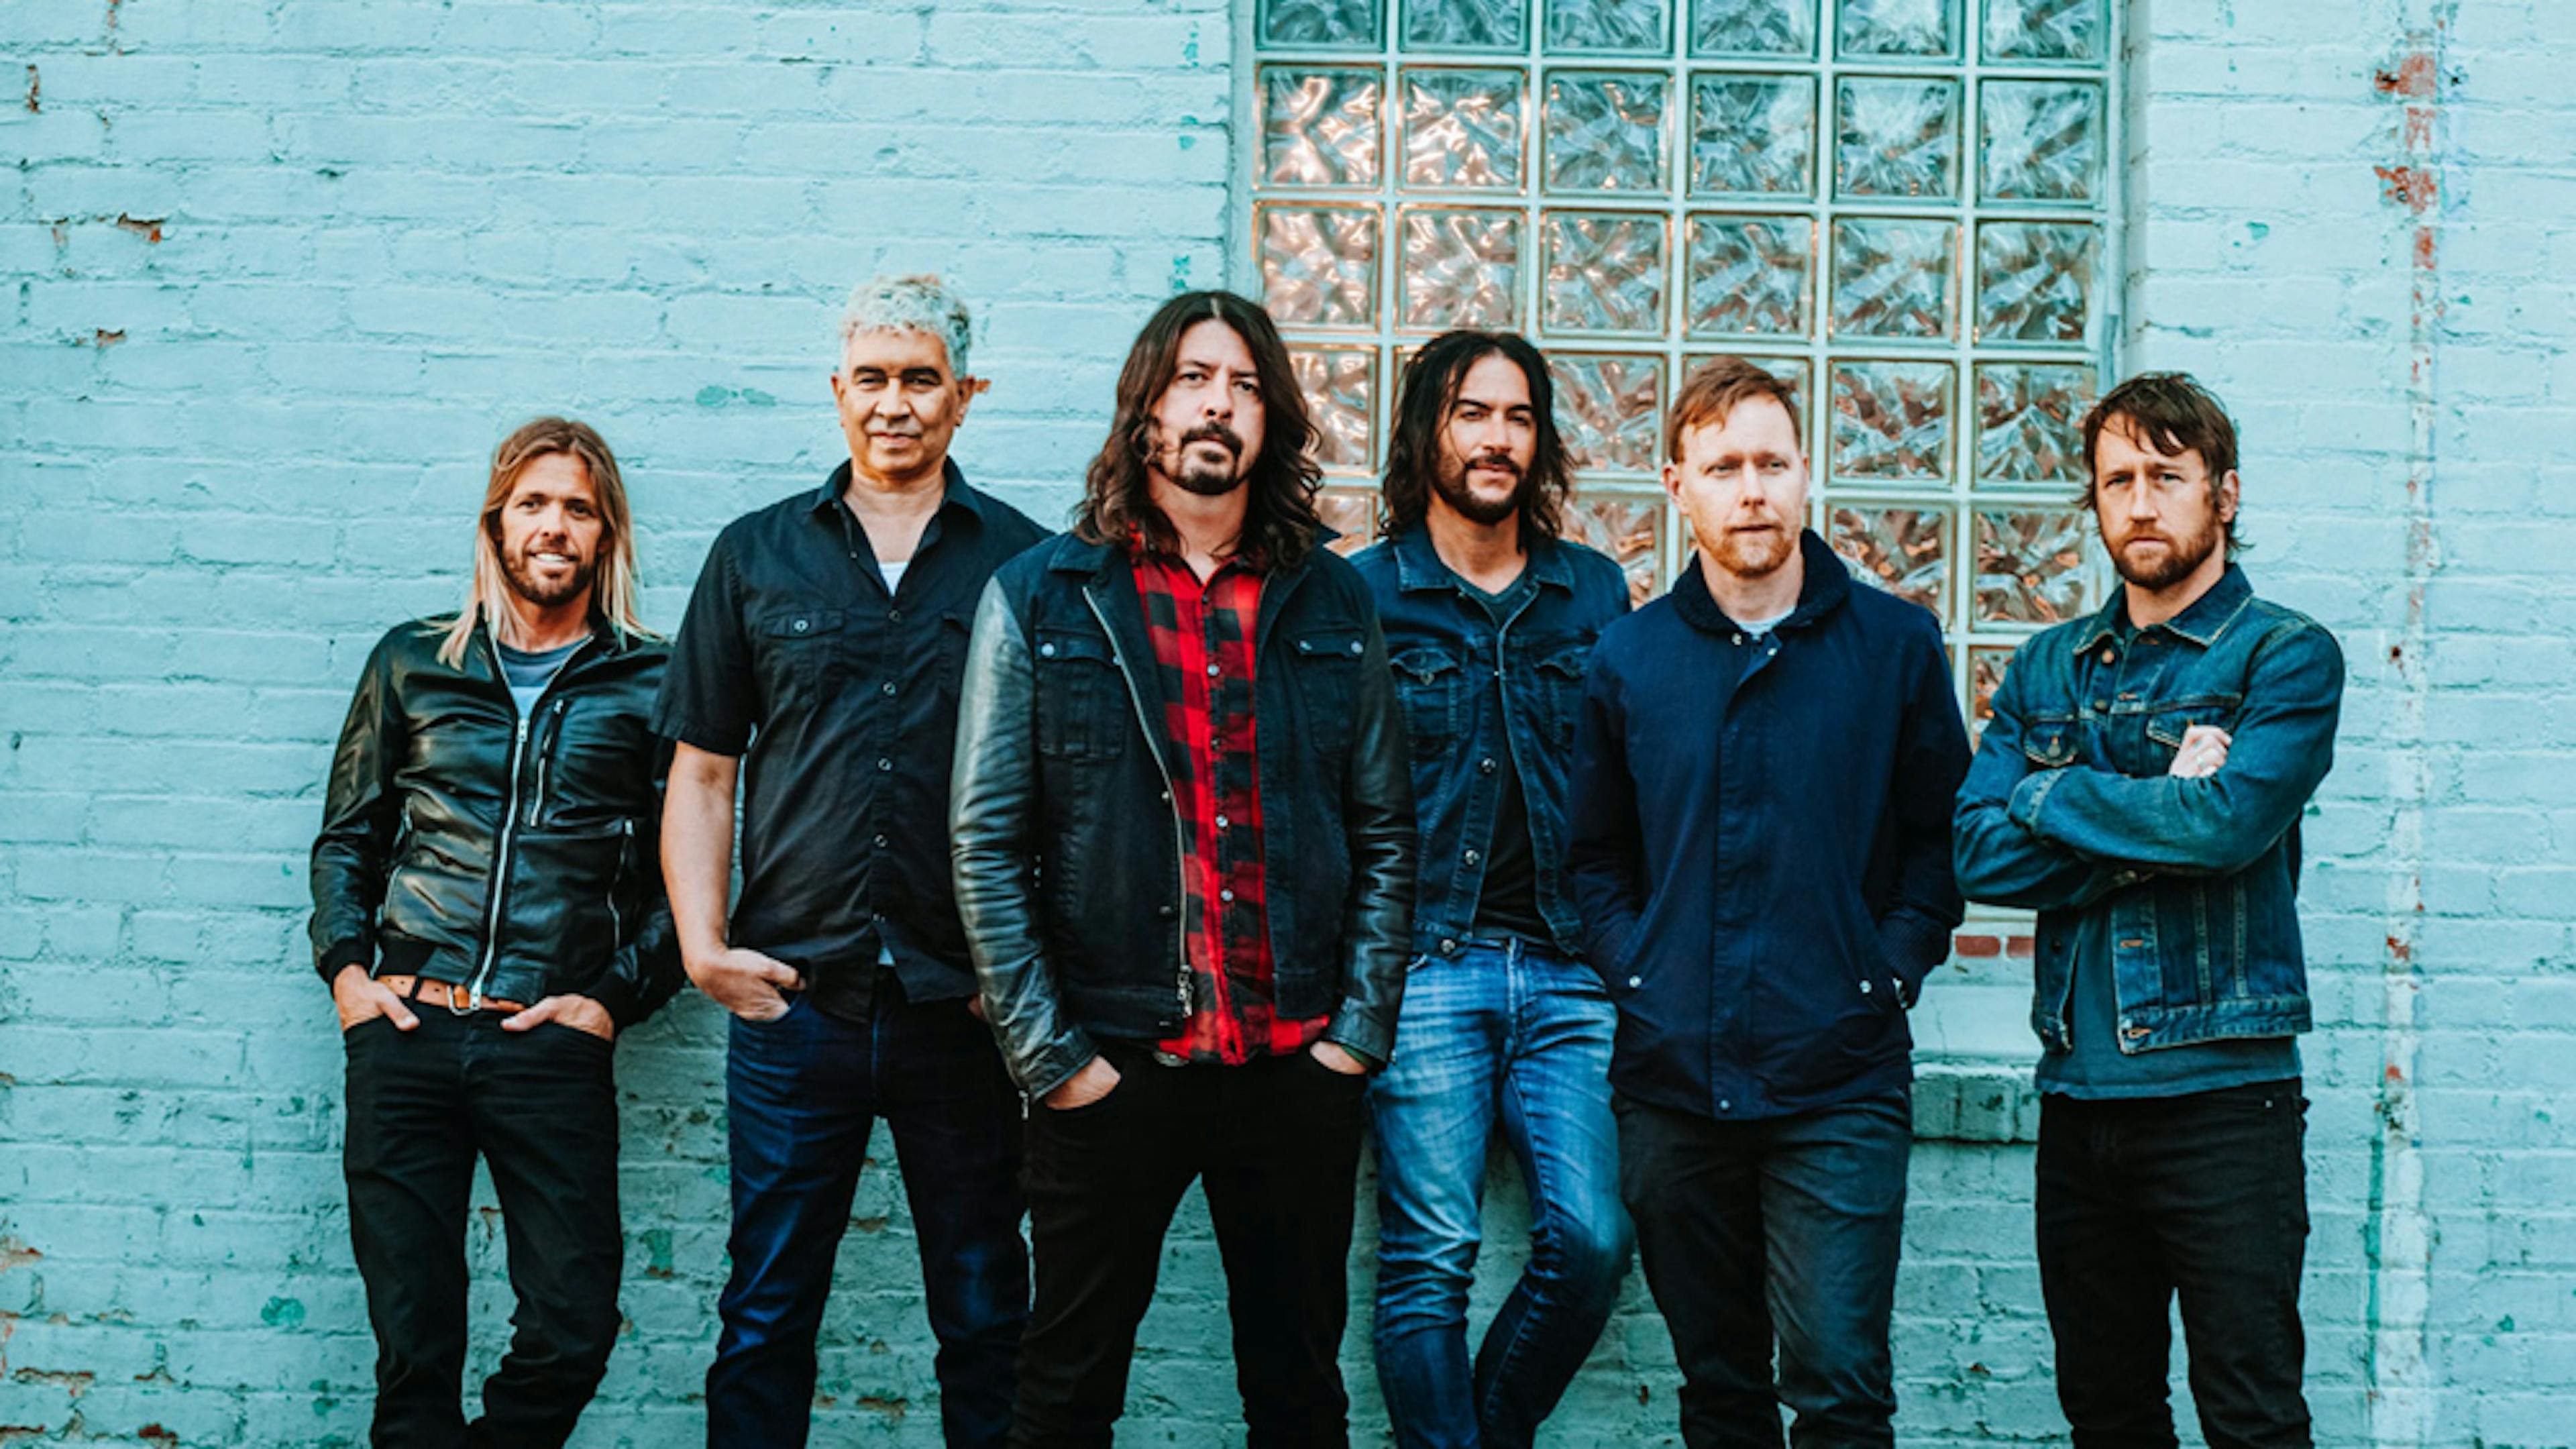 Watch Rick Astley Perform With The Foo Fighters In London